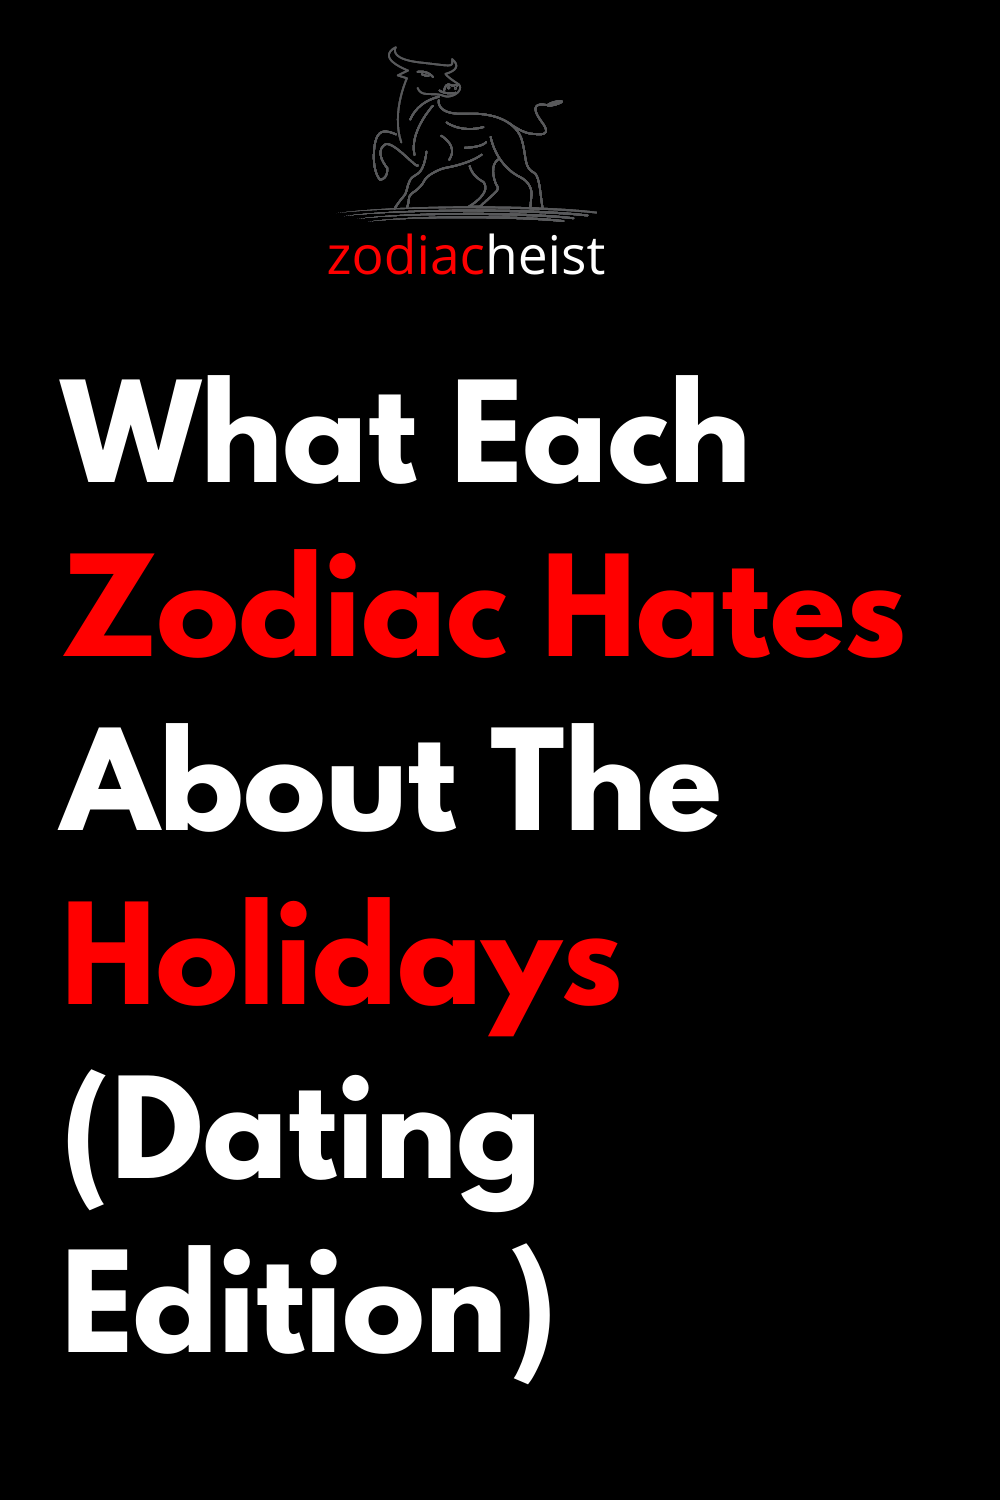 What Each Zodiac Hates About The Holidays (Dating Edition)